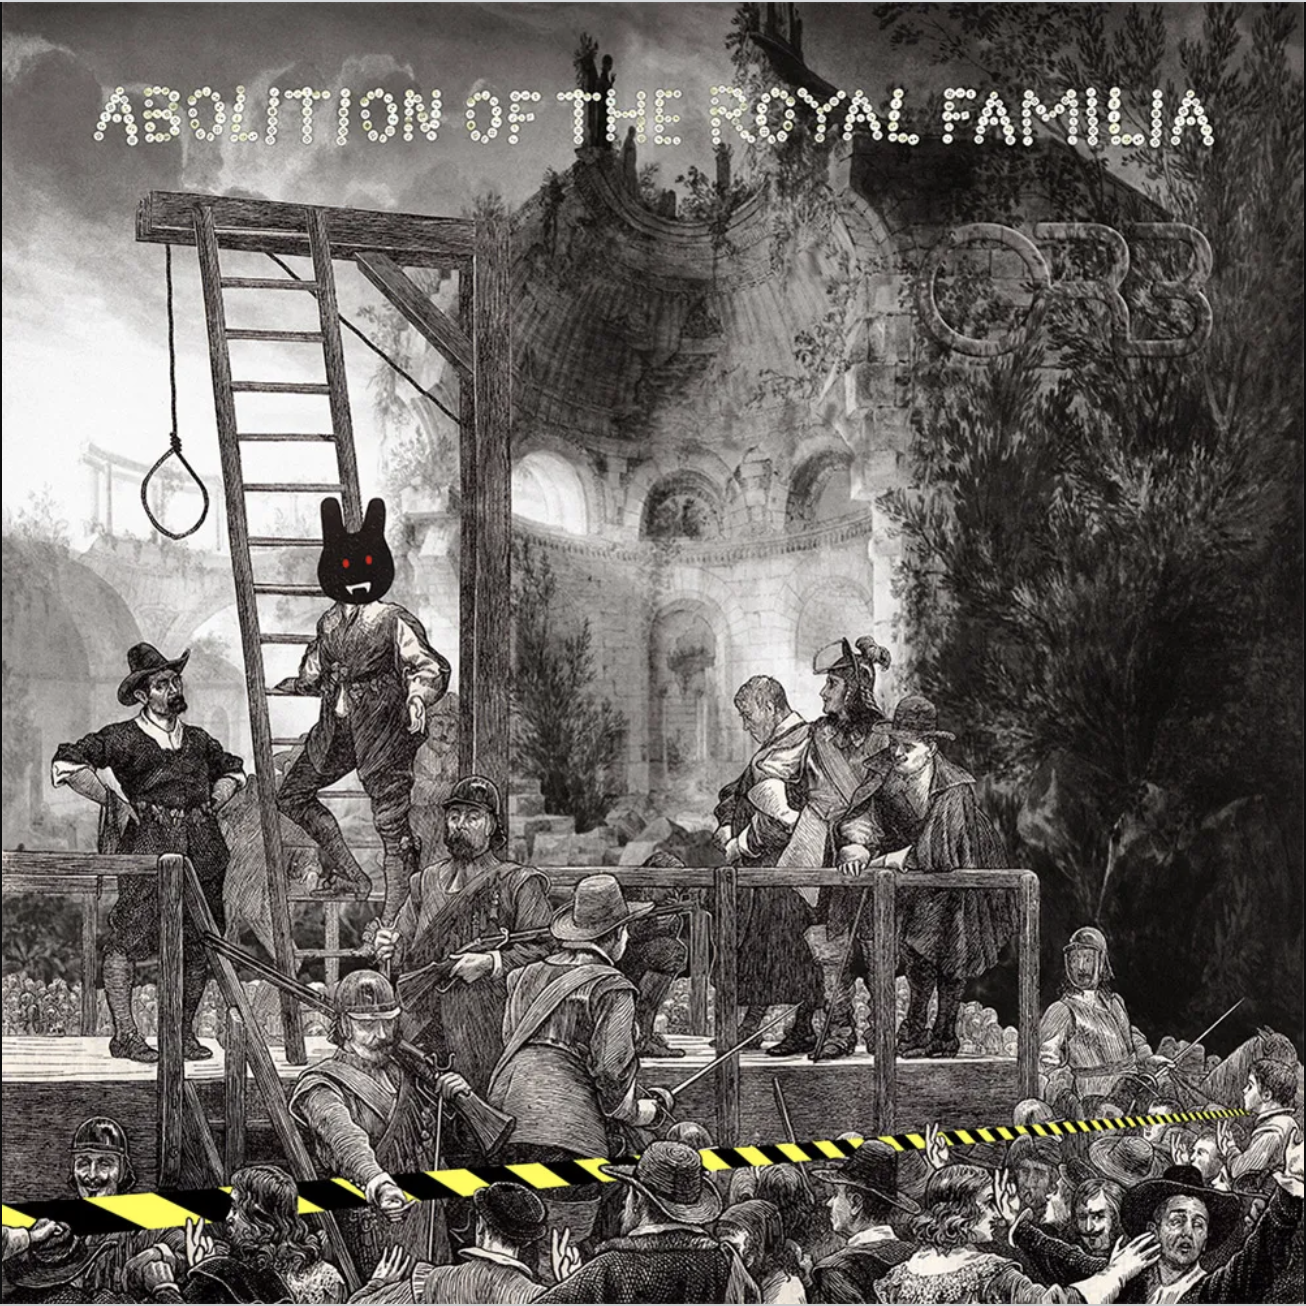 Abolition of the Royal Familia.png